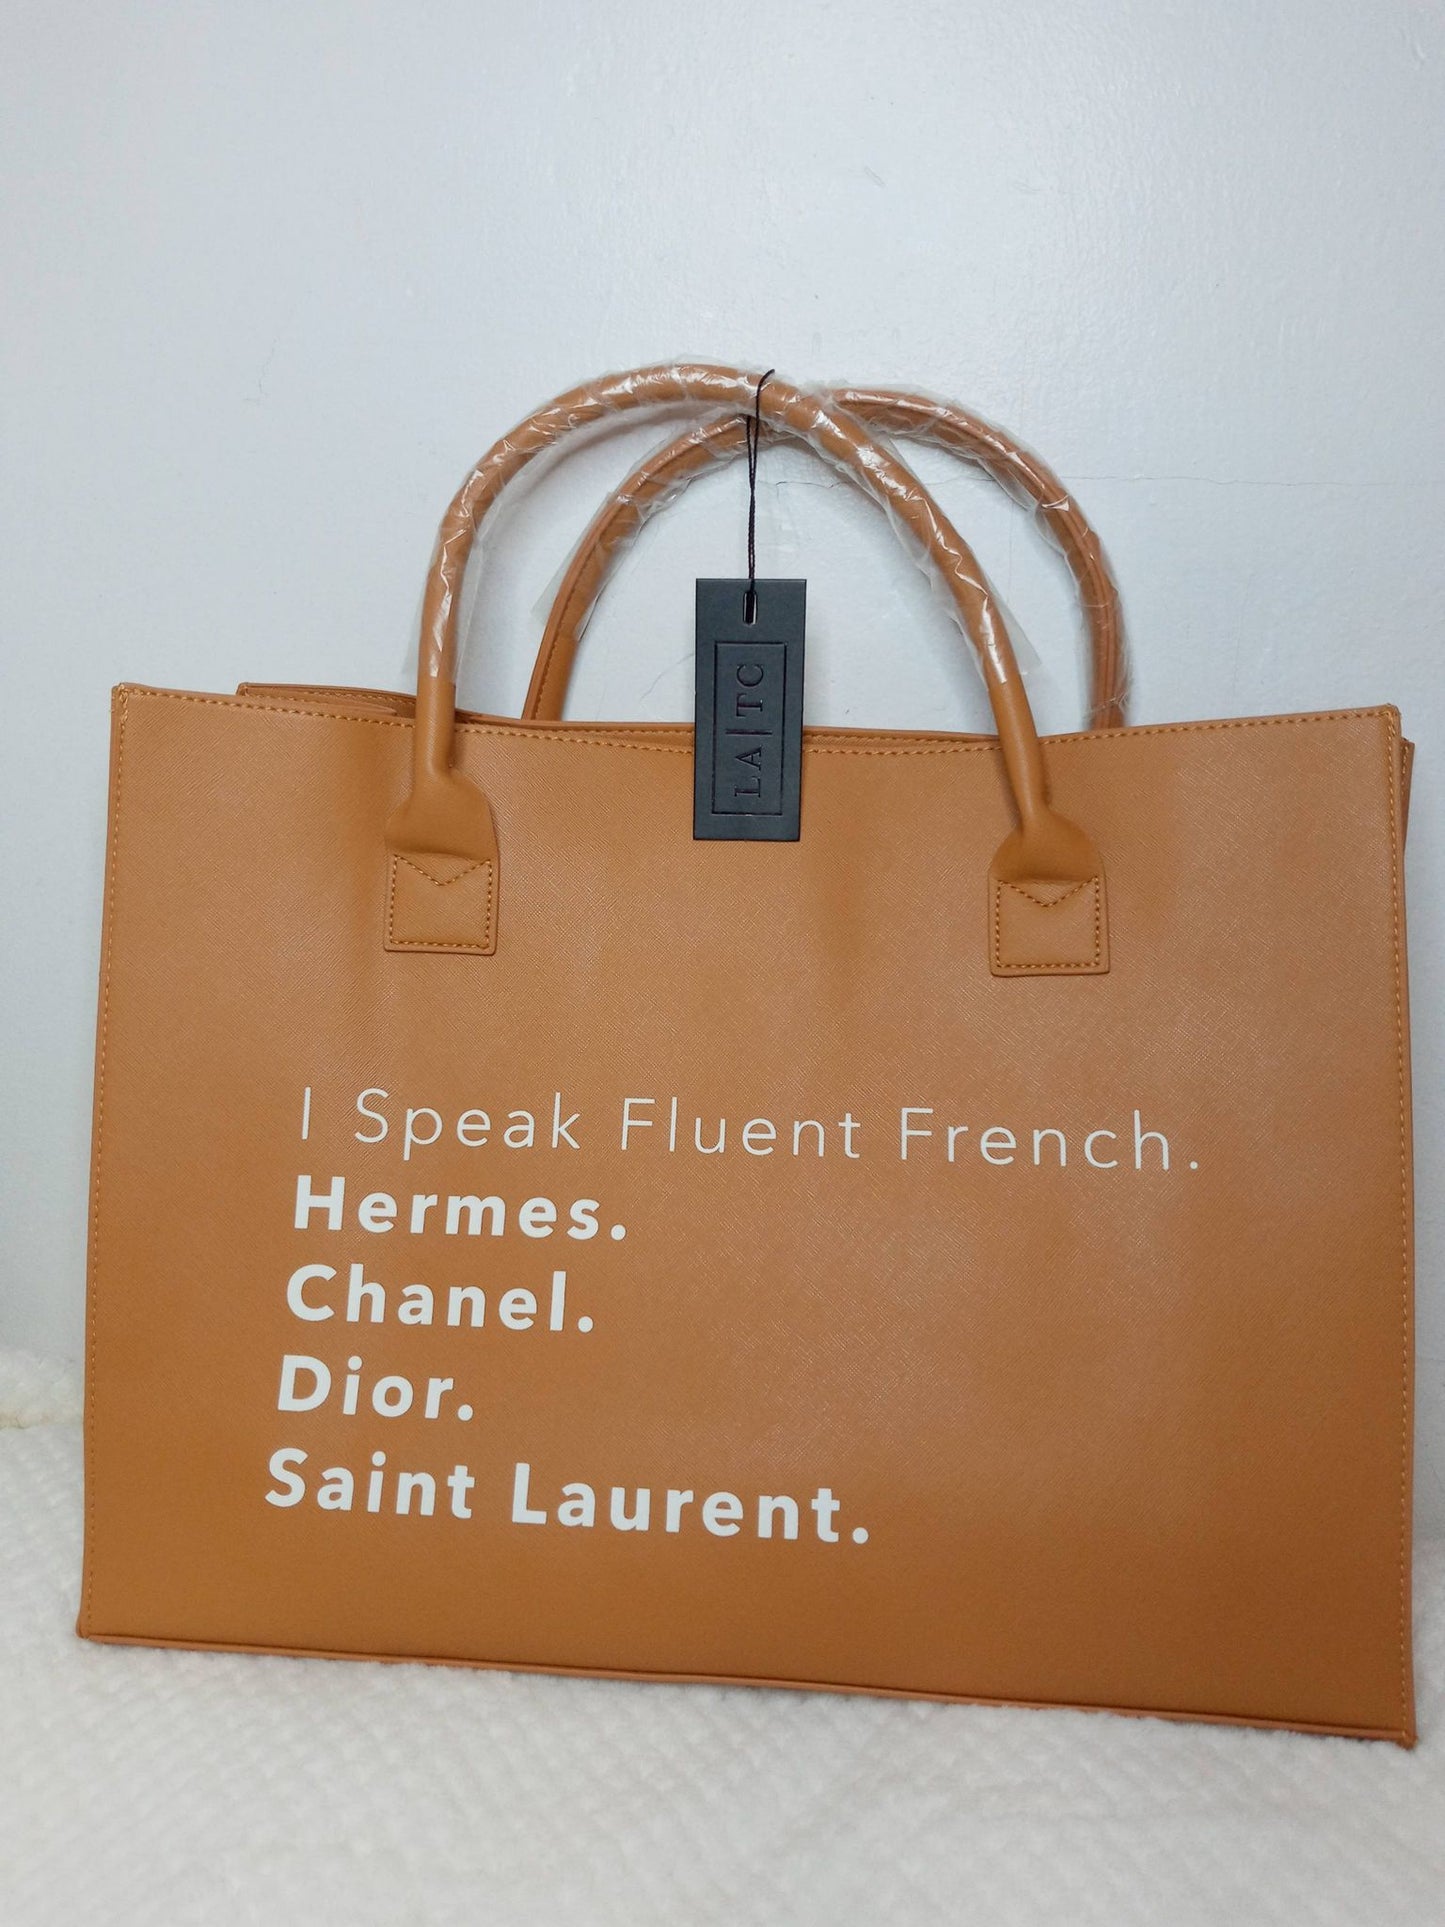 I Speak Fluent French  Tote Bag for Sale by markdn45